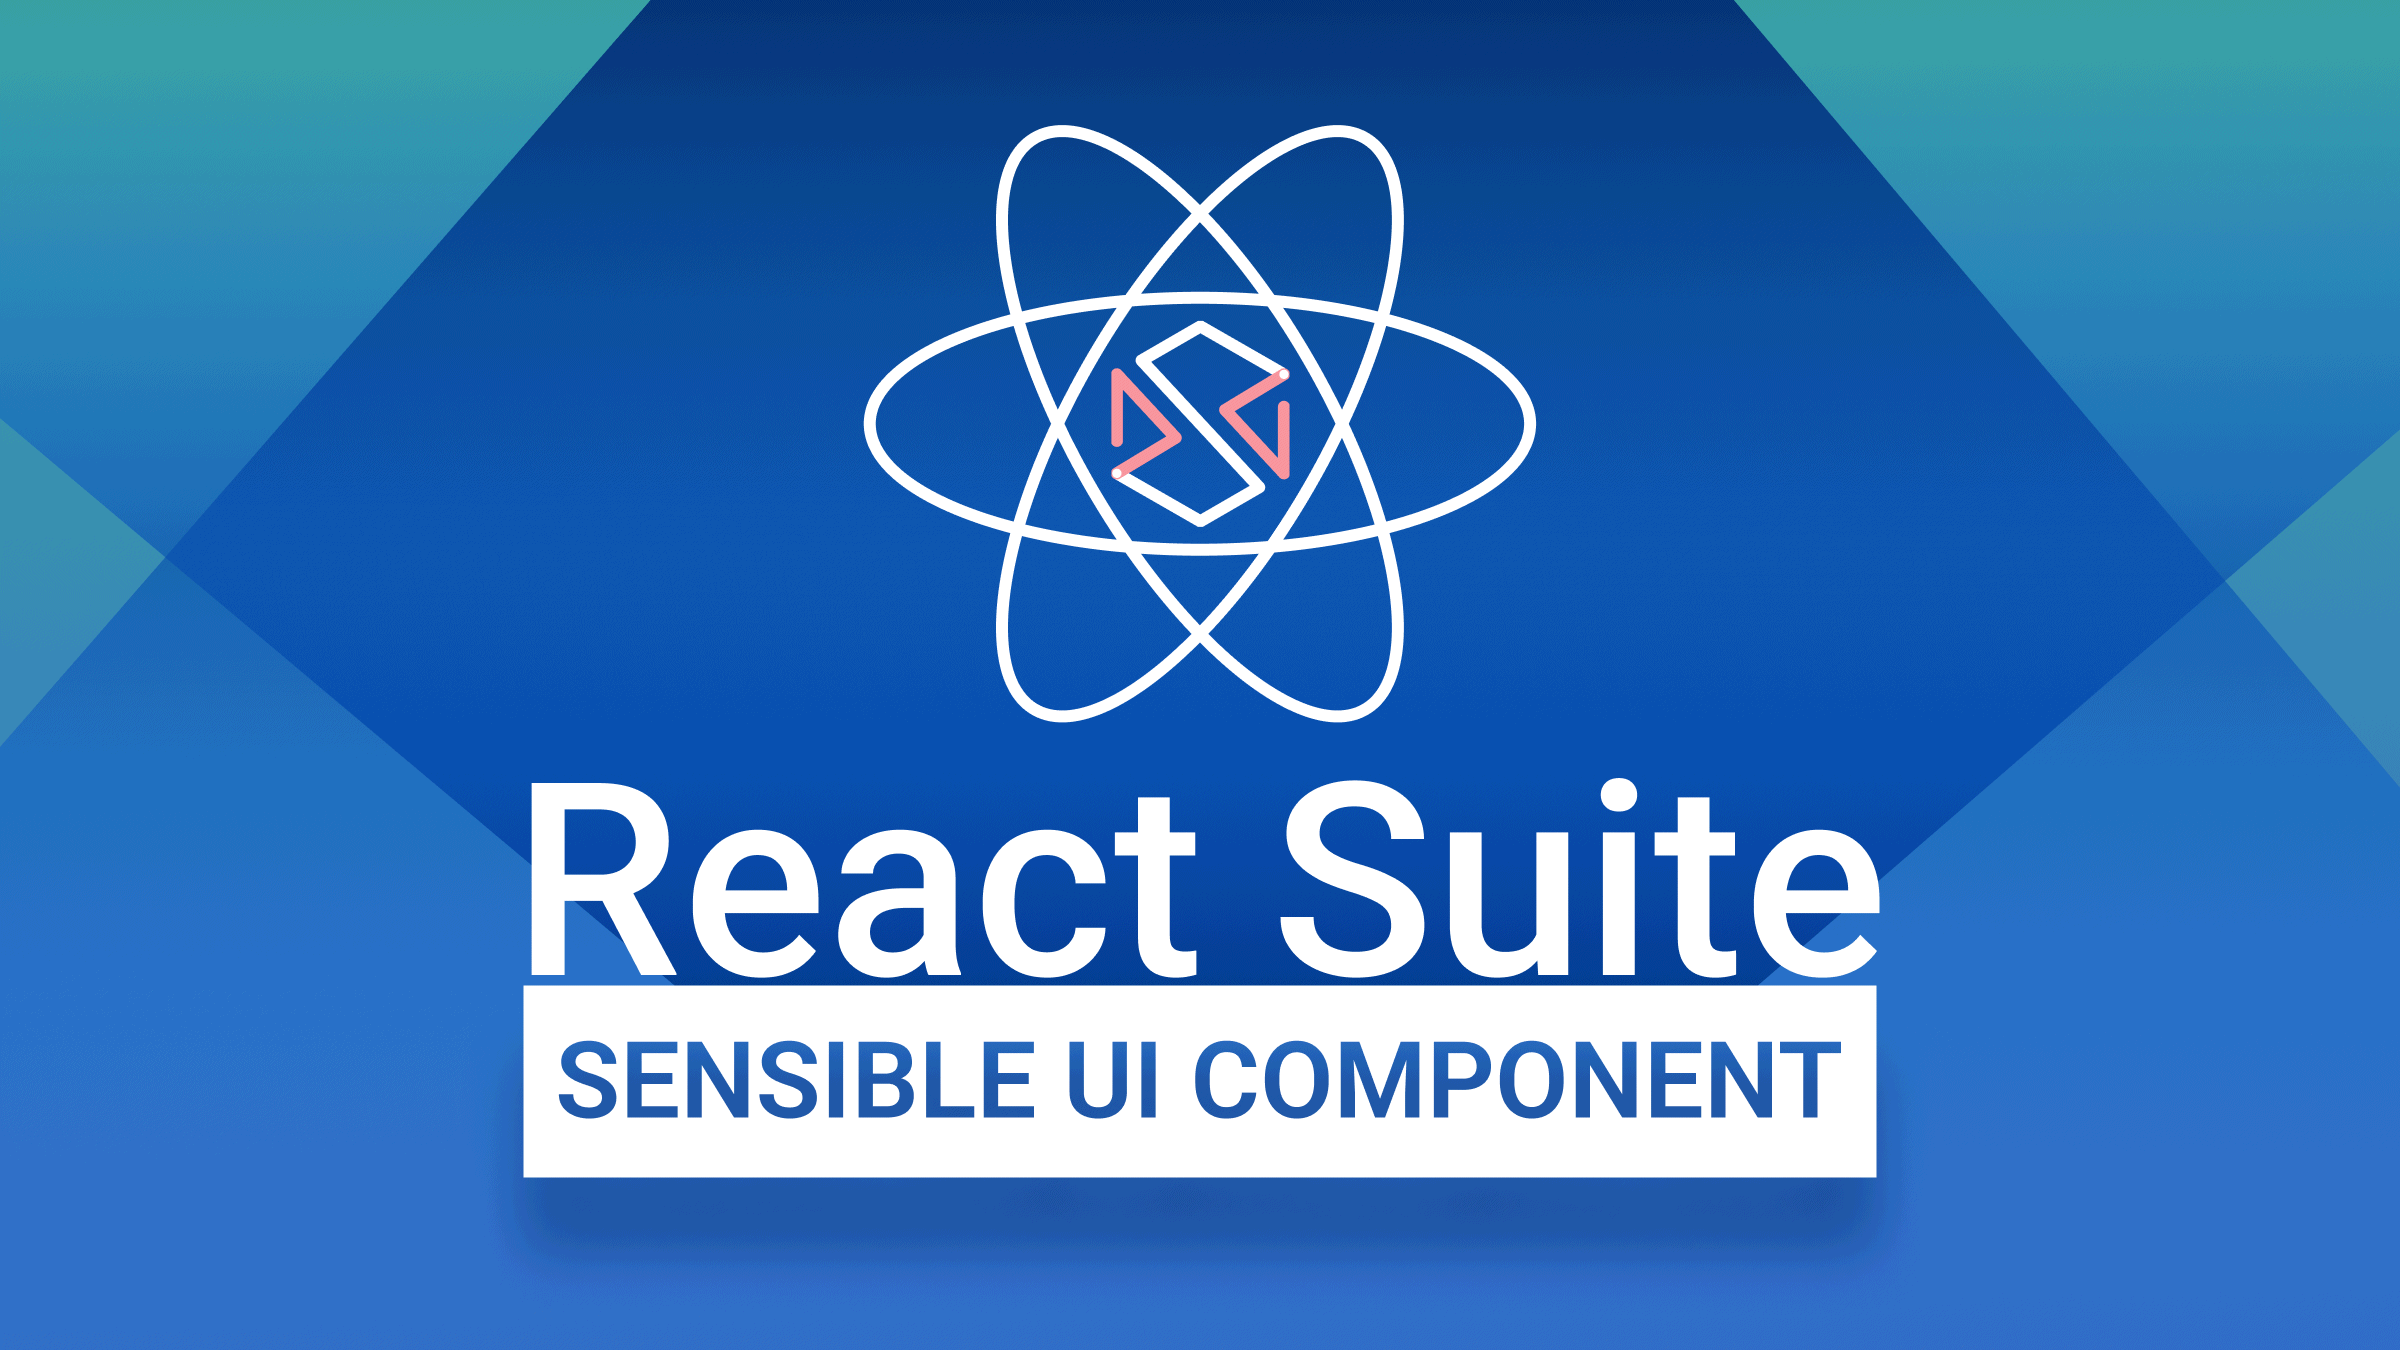 Building sensible UI components with React Suite